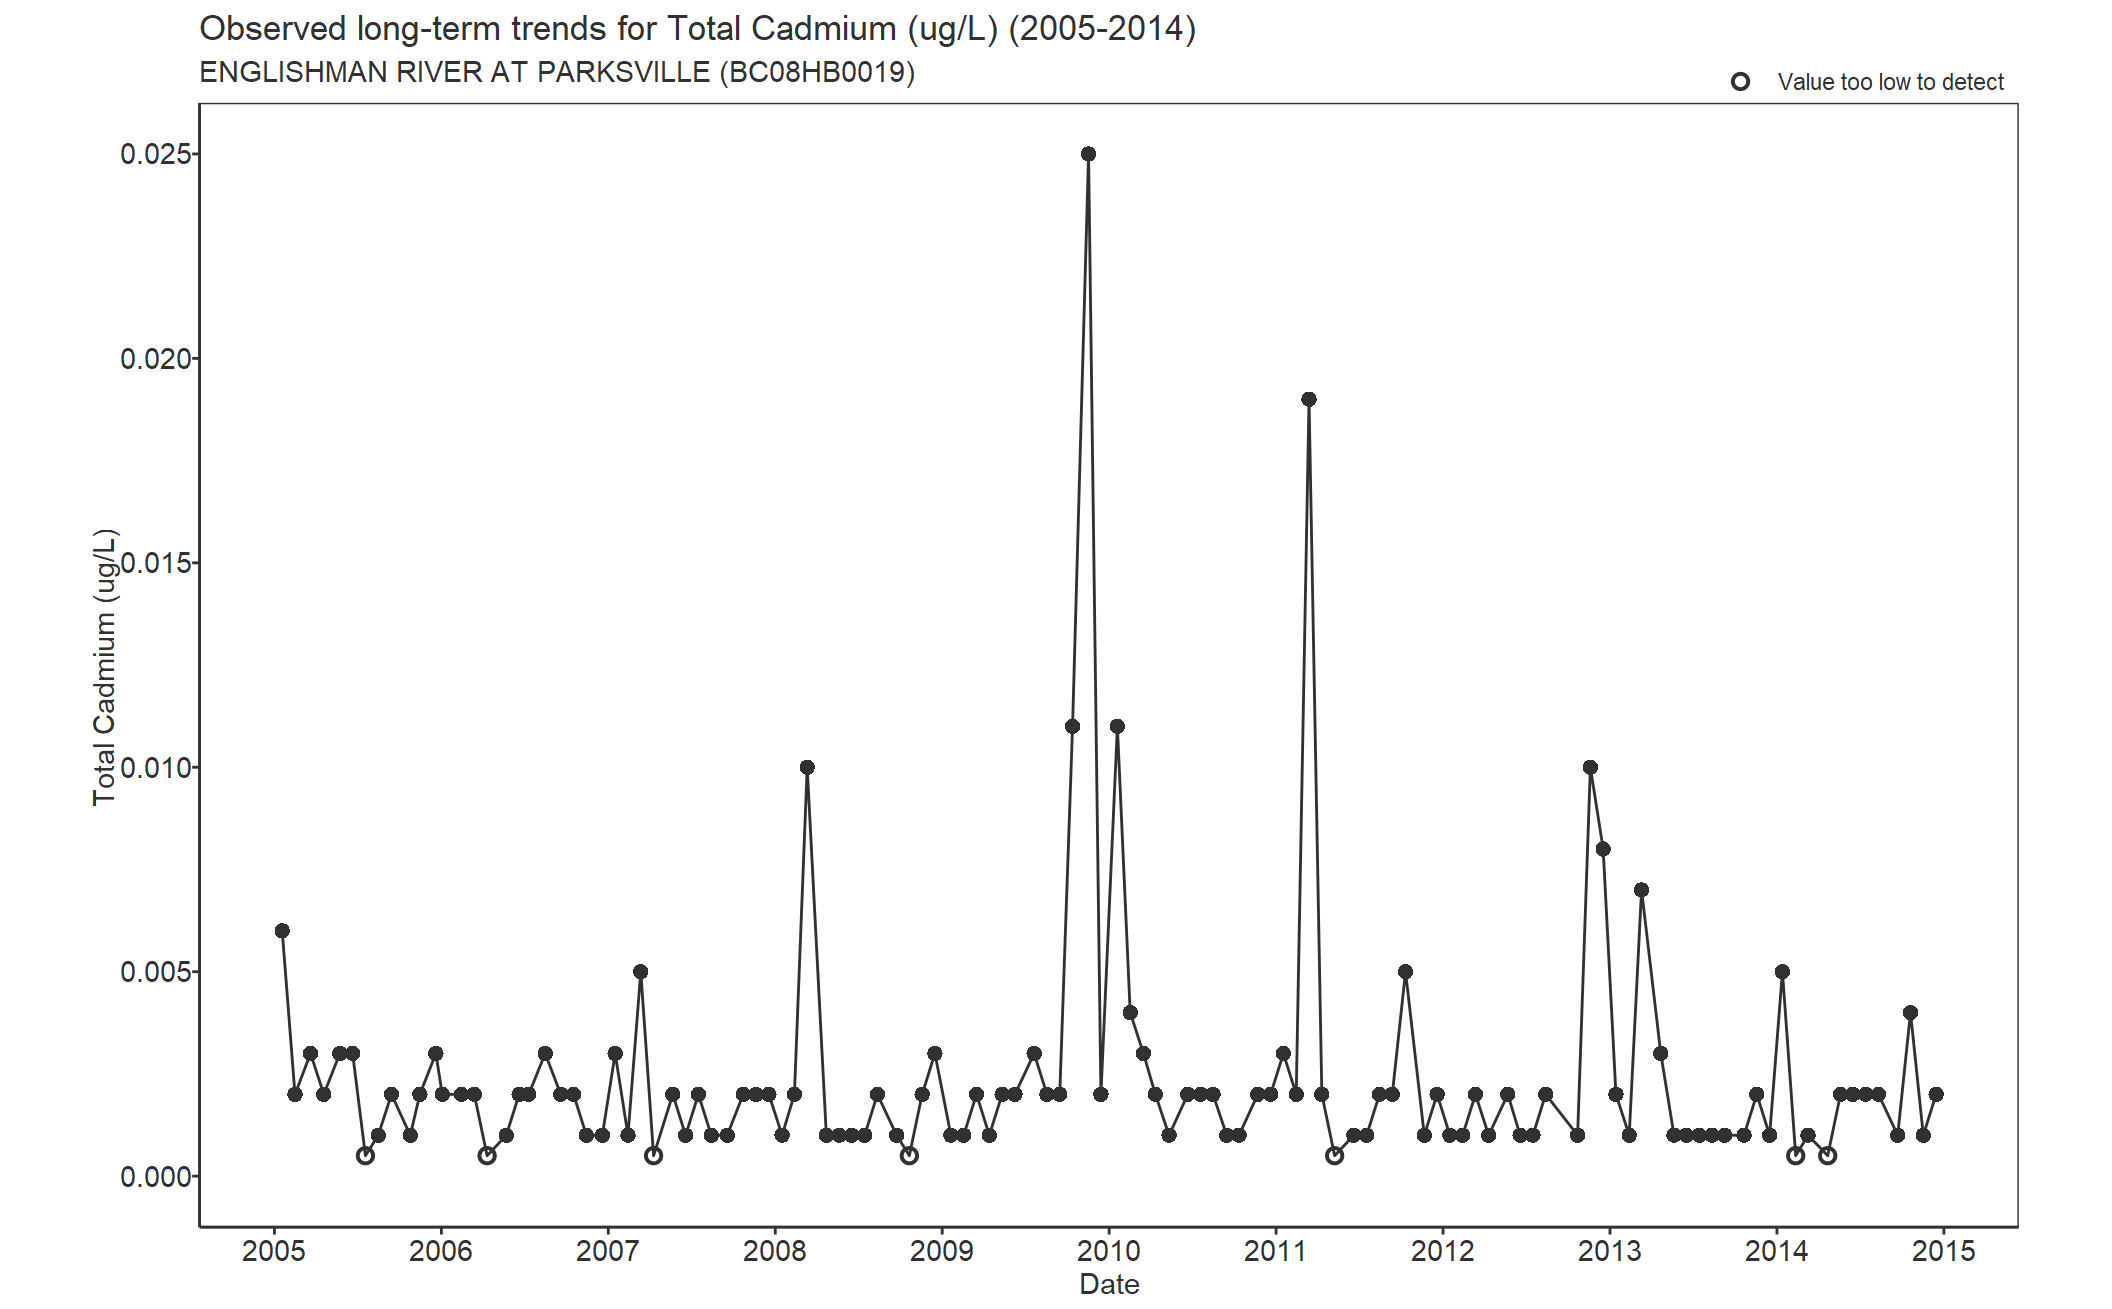 Observed long-term trends for Total Cadmium (2005-2014)